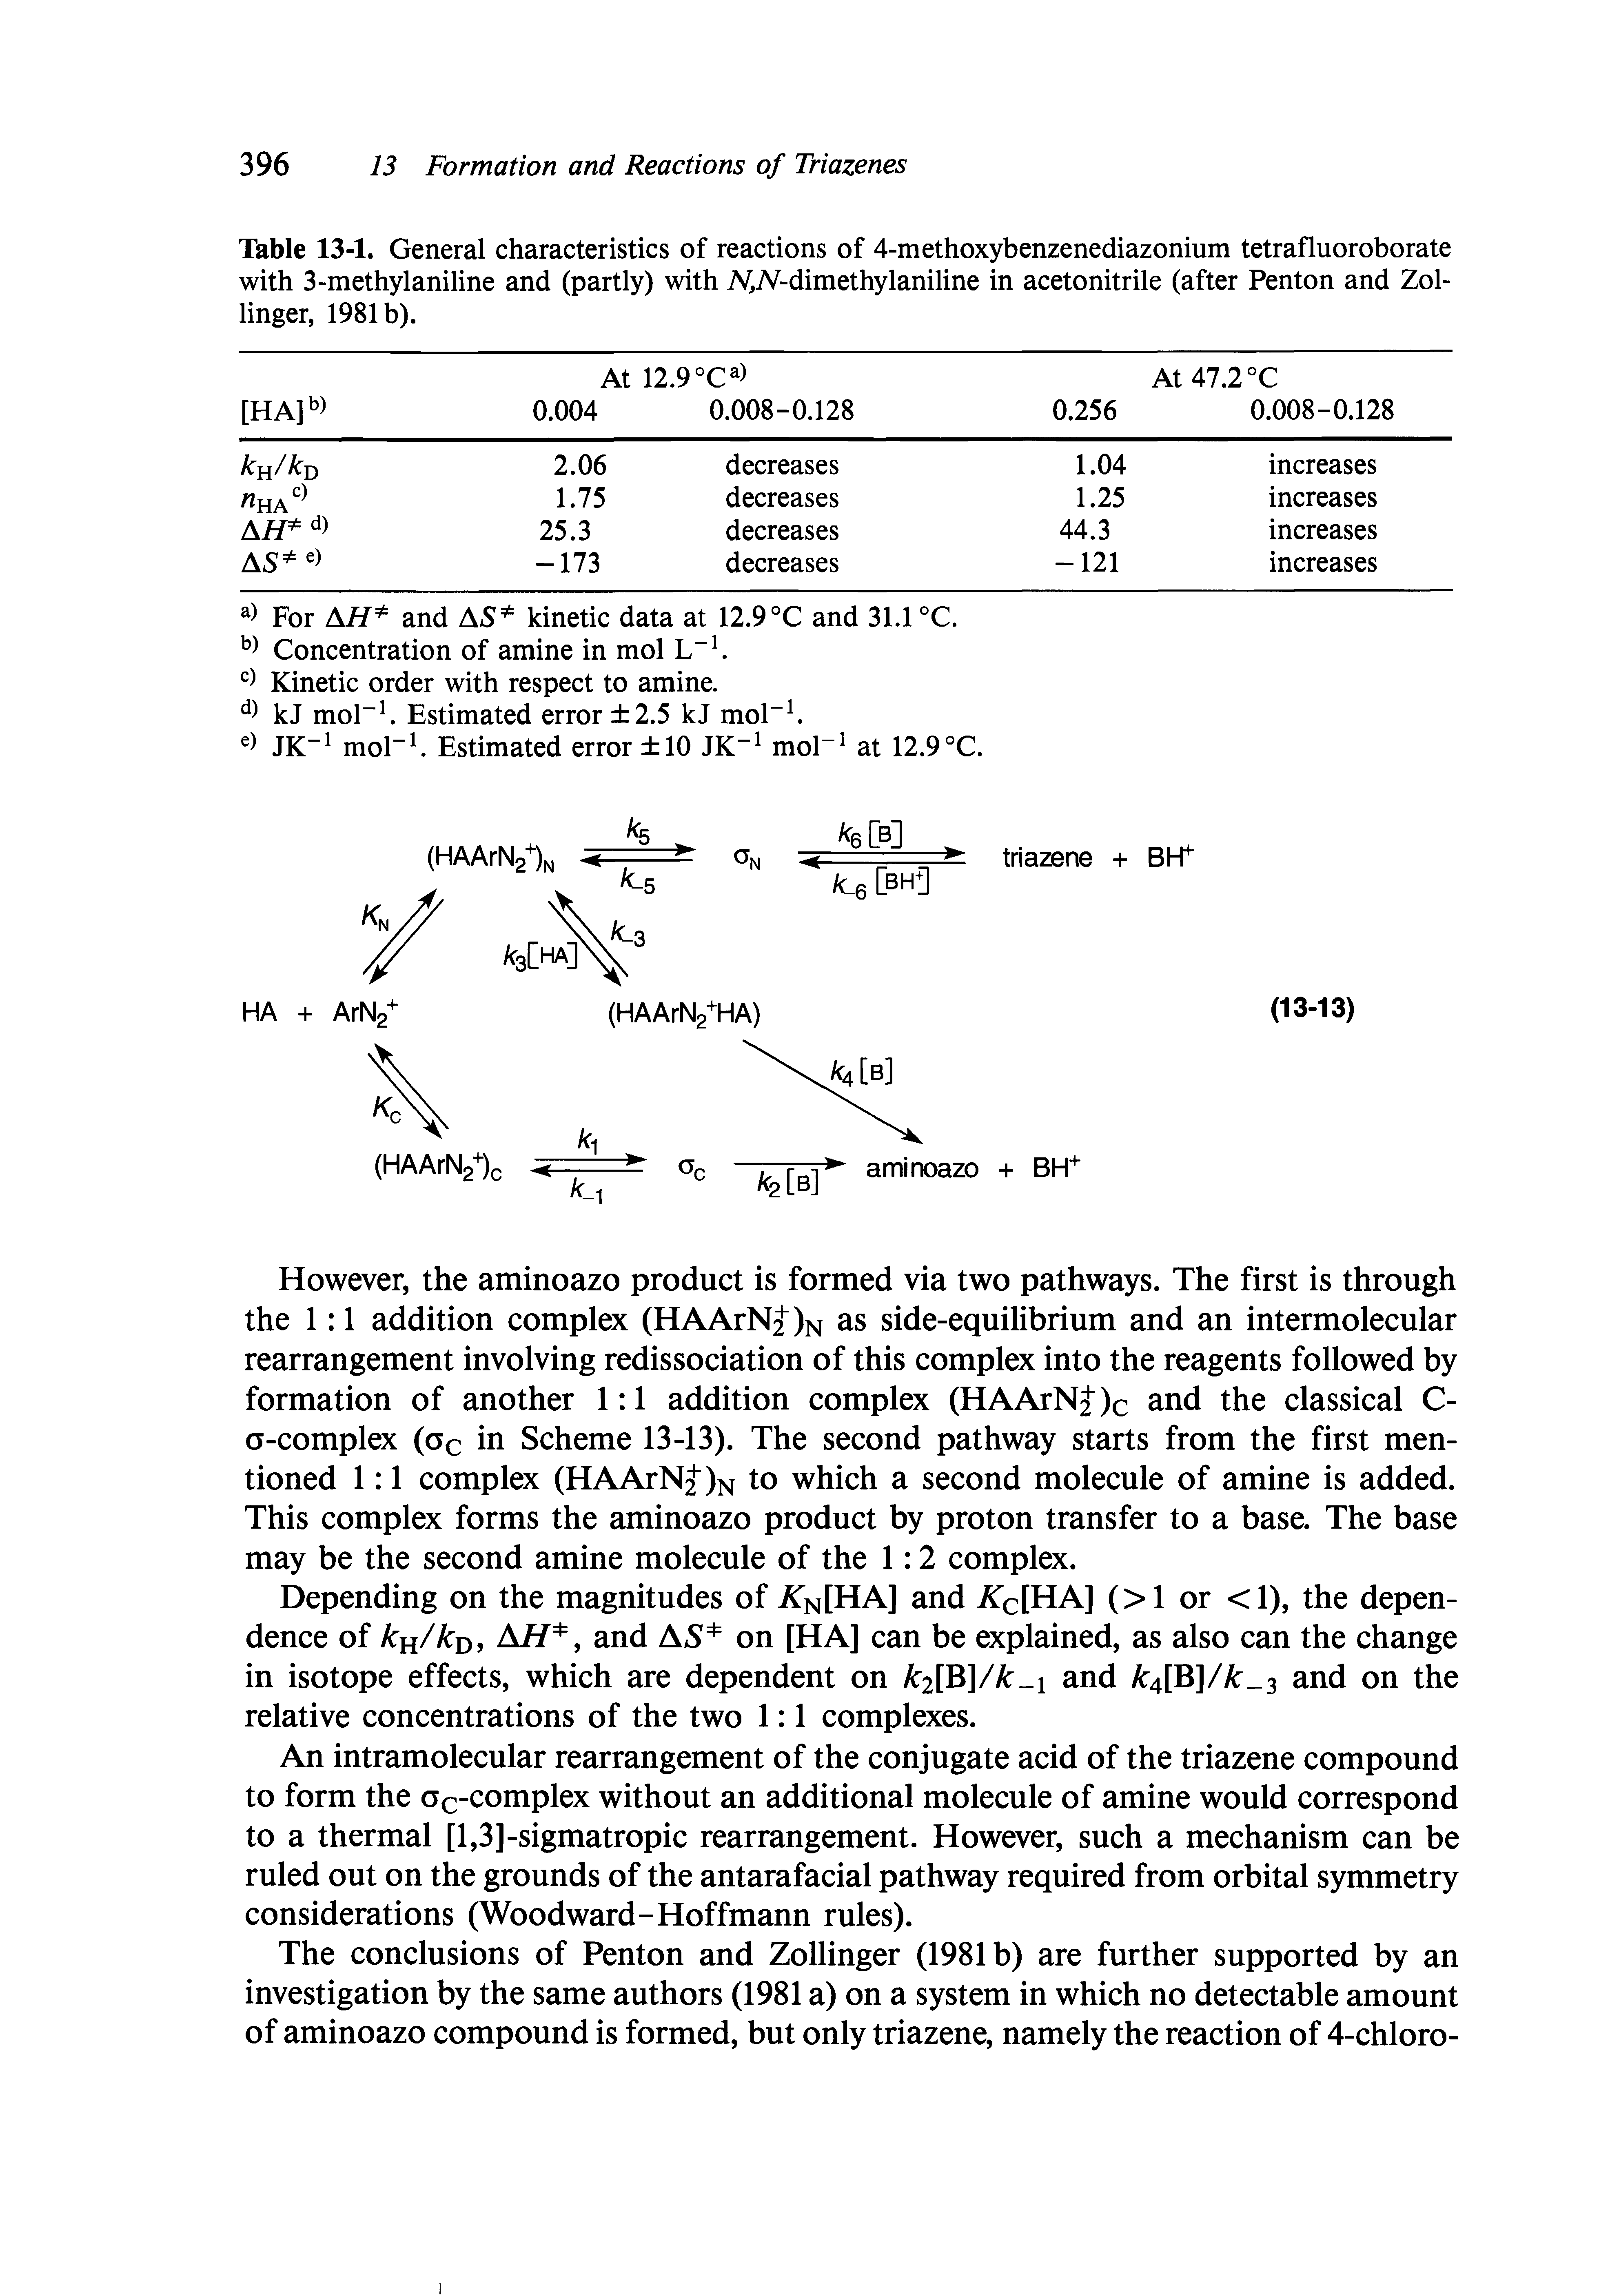 Table 13-1. General characteristics of reactions of 4-methoxybenzenediazonium tetrafluoroborate with 3-methylaniline and (partly) with 7V,7V-dimethylaniline in acetonitrile (after Penton and Zollinger, 1981b).